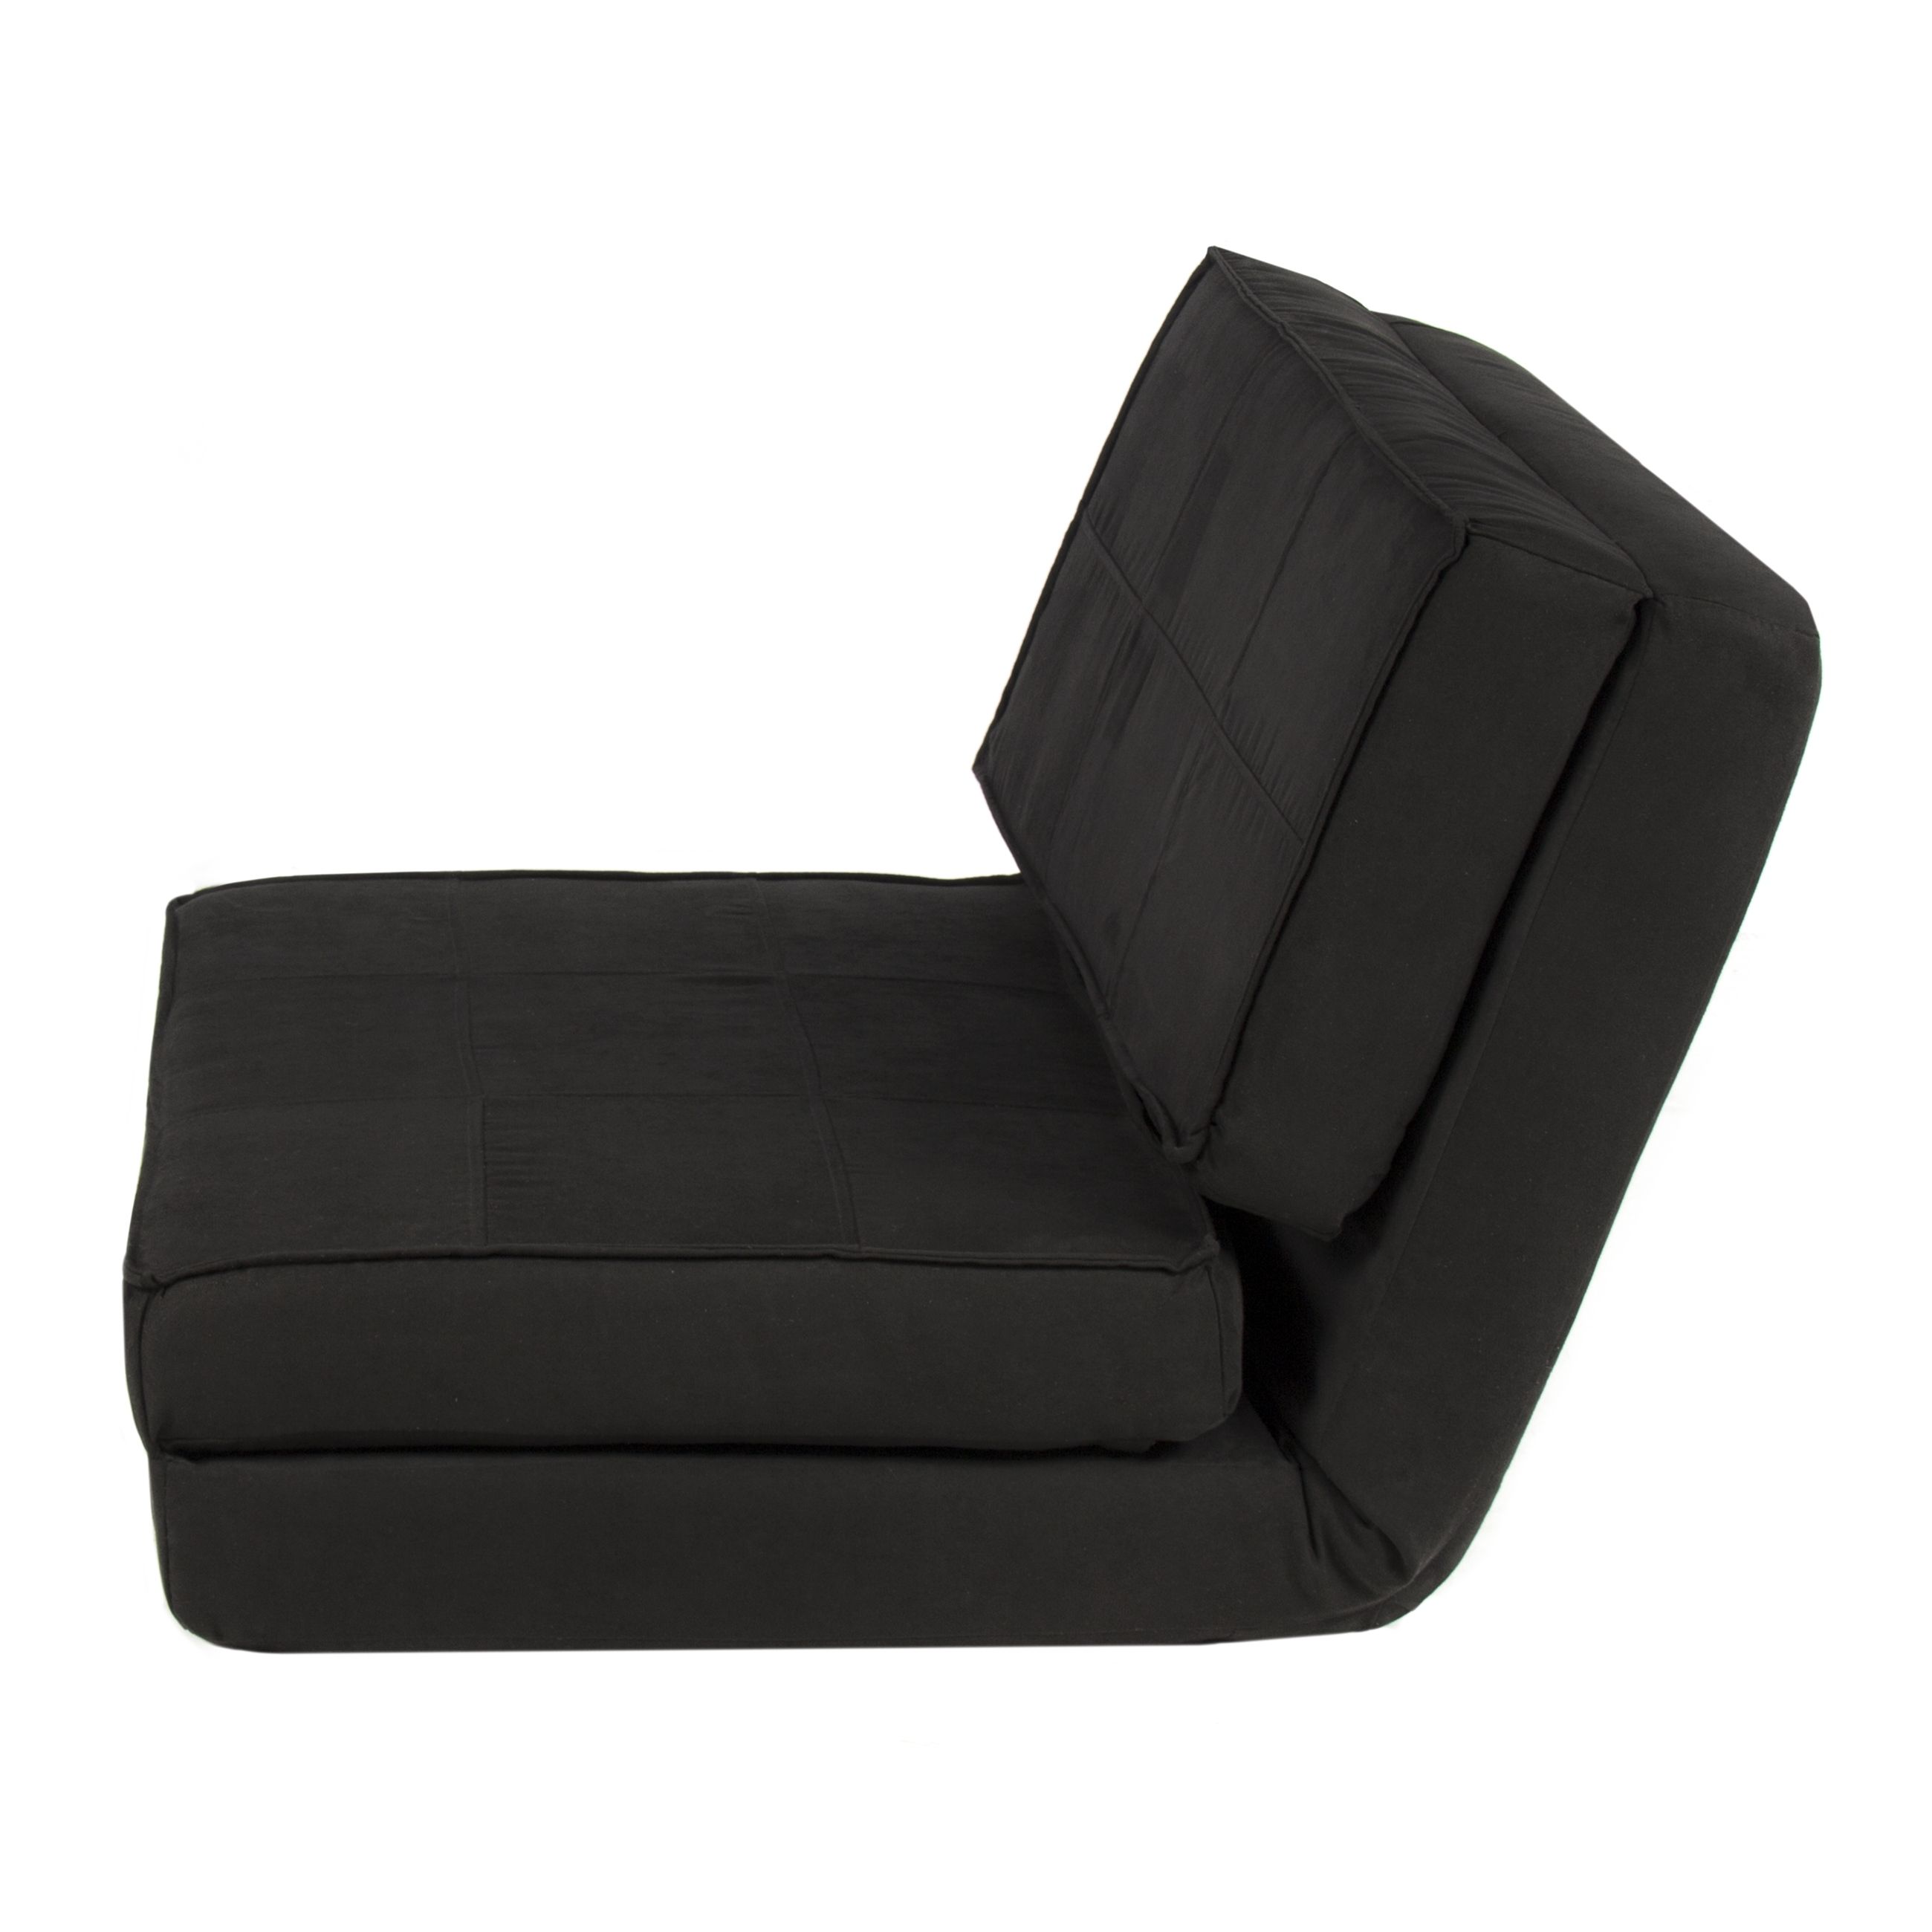 Folding Sofa Chairs In Most Recent Best Choice Products Convertible Sleeper Chair Bed (black (Photo 7 of 15)